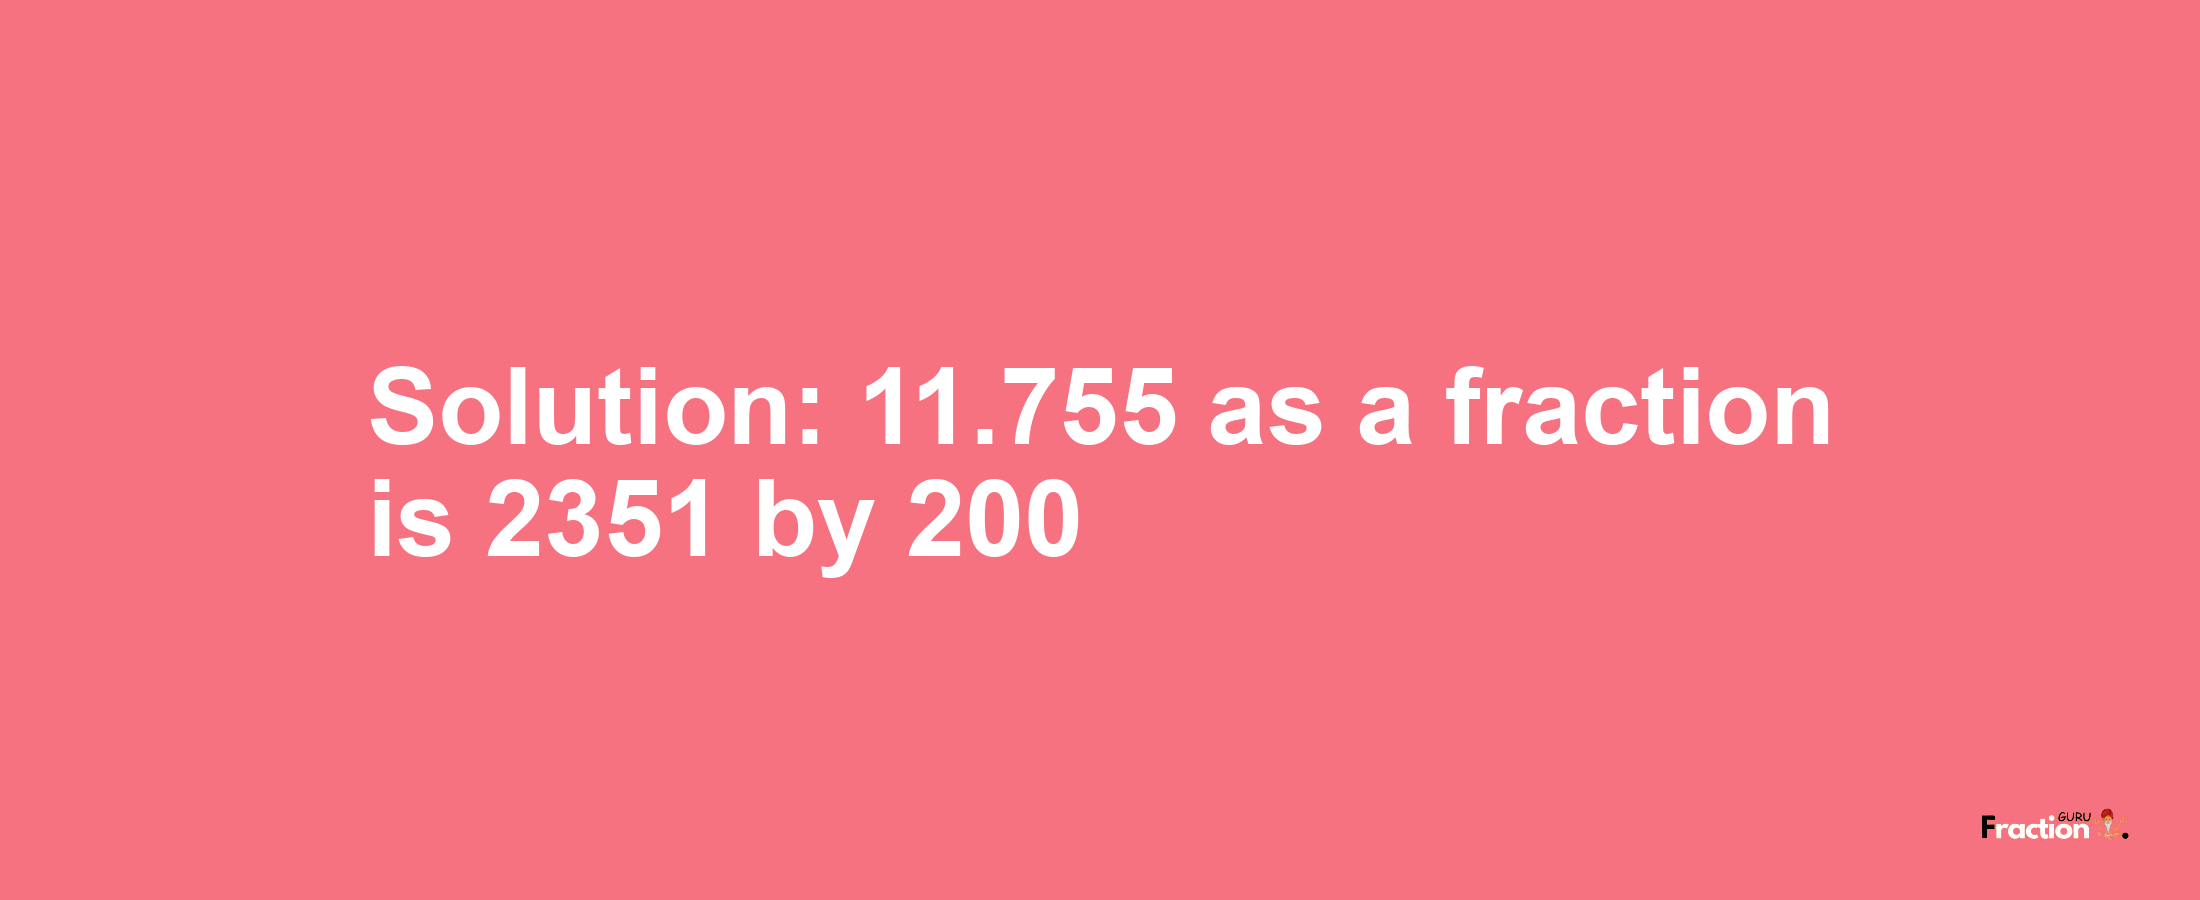 Solution:11.755 as a fraction is 2351/200